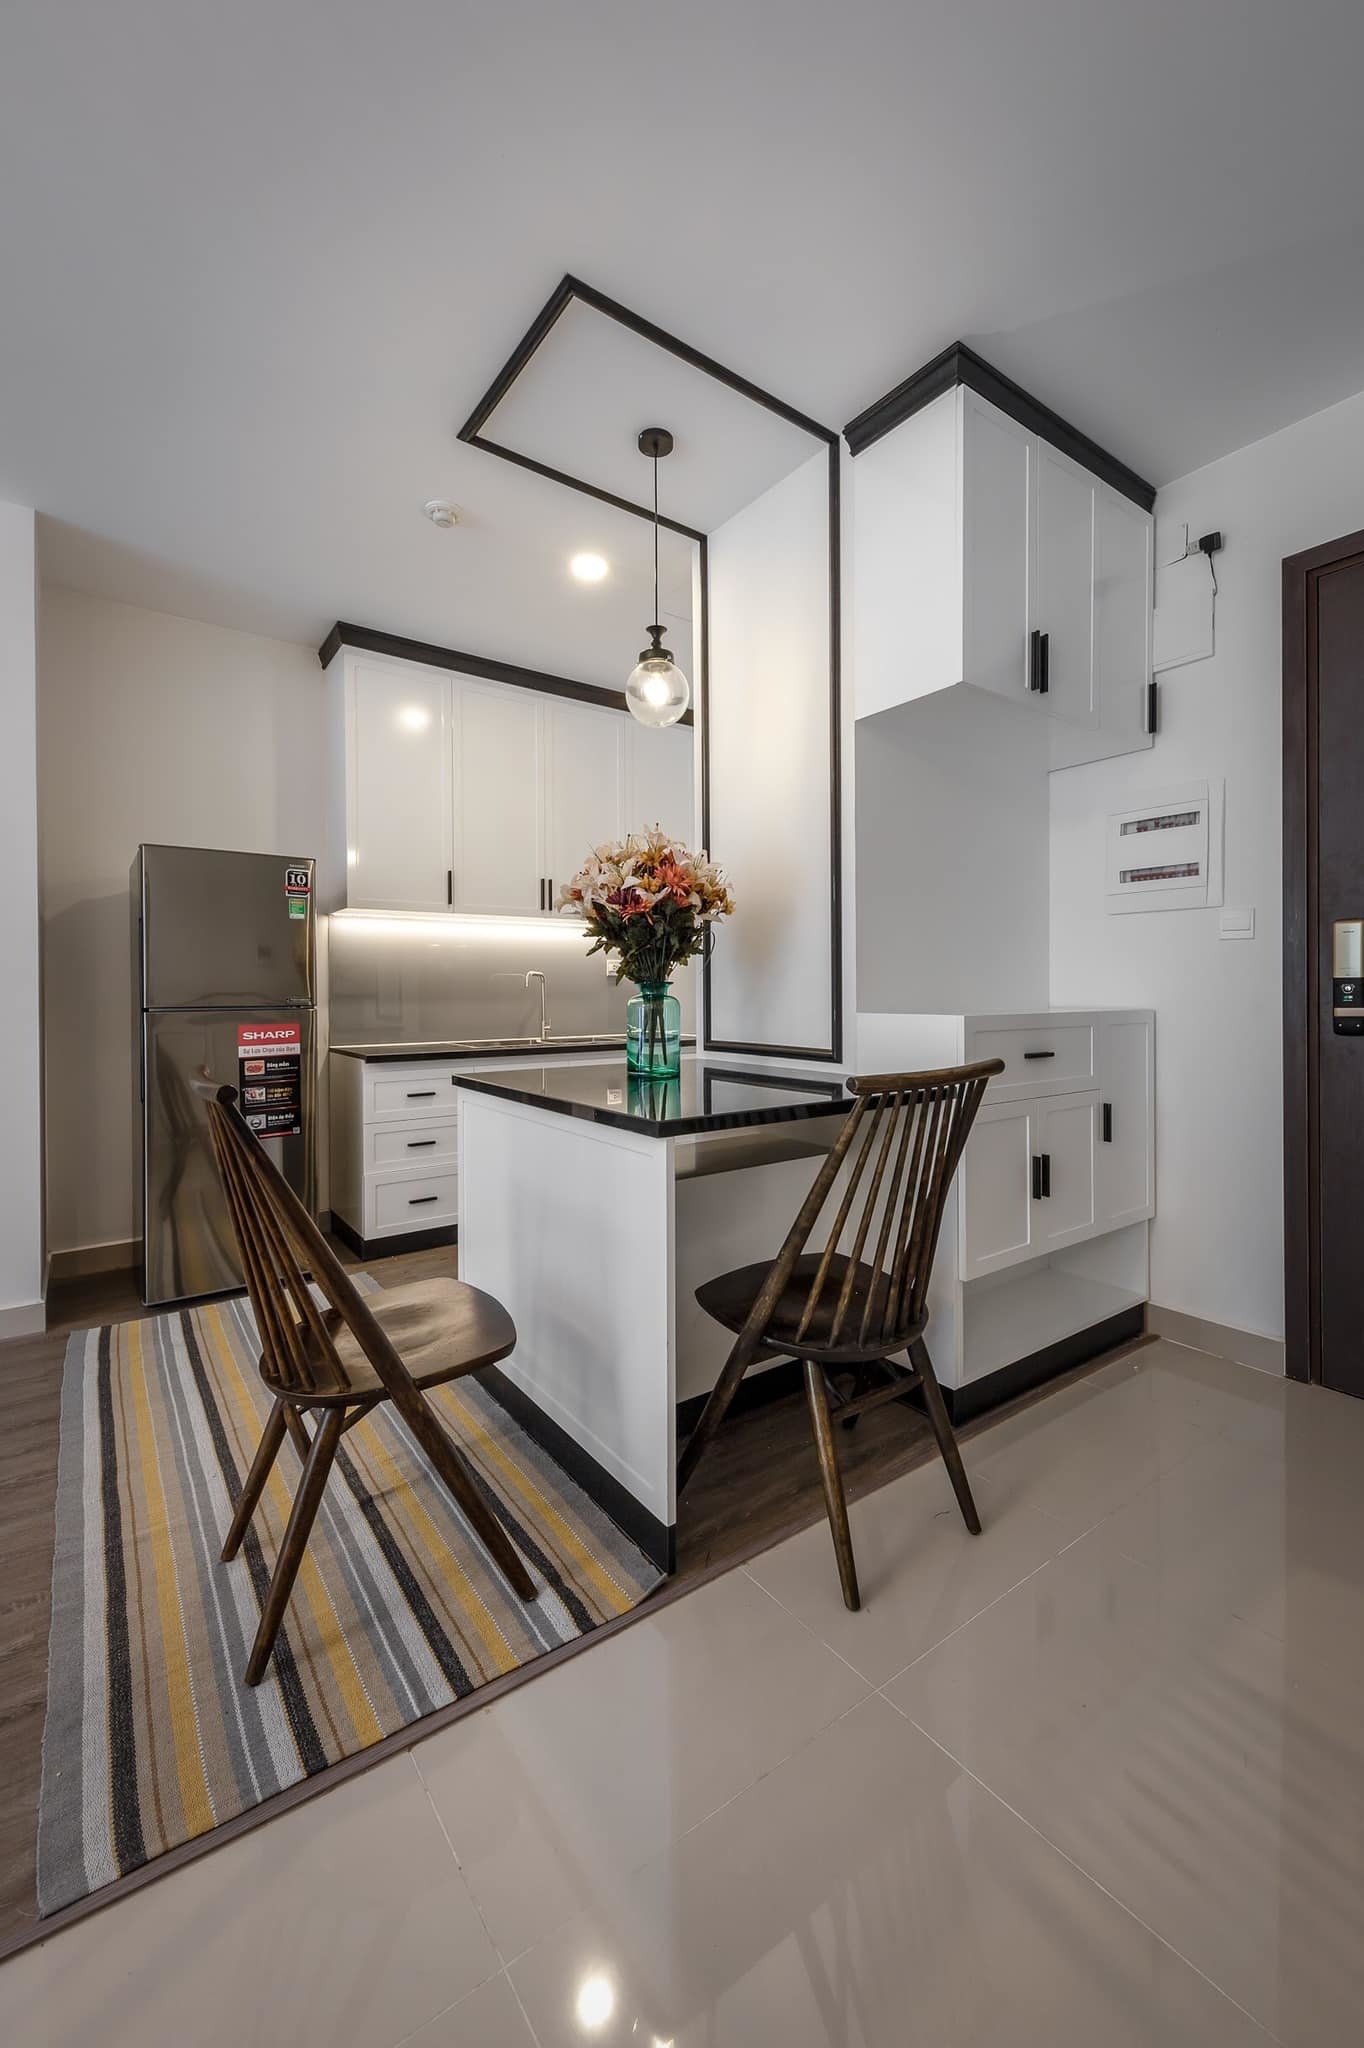 Indochine apartment brings a modern breath, not groundbreaking but making a lasting impression